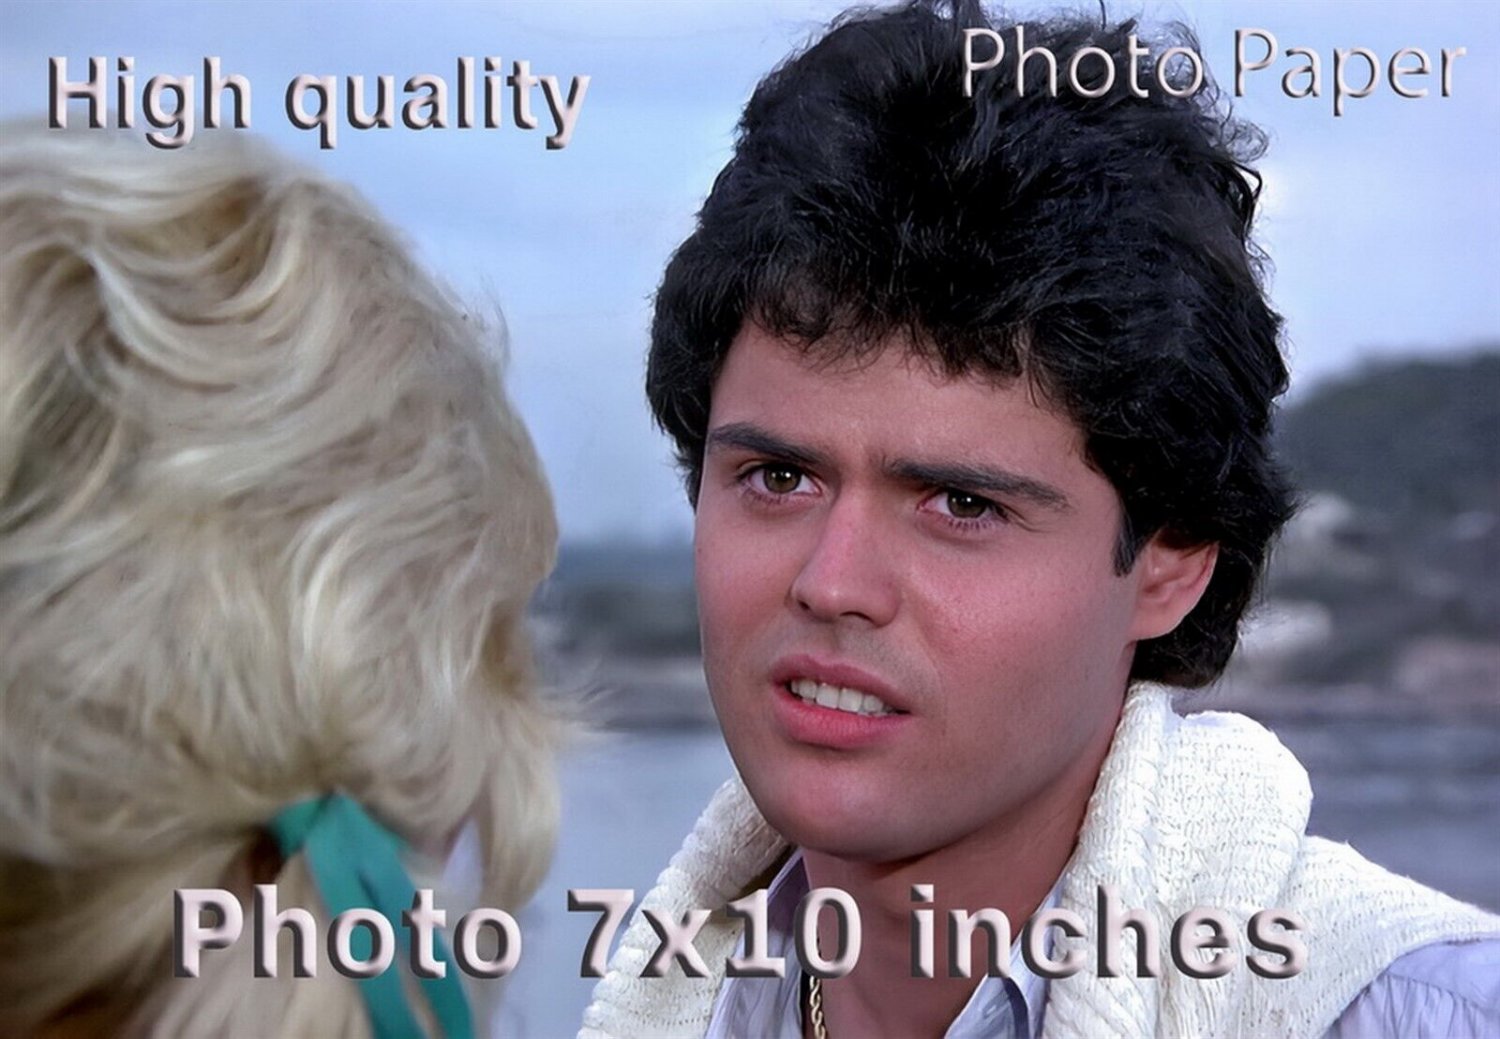 Donny Osmond LOVE BOAT PHOTO HQ 10x7 inches #10